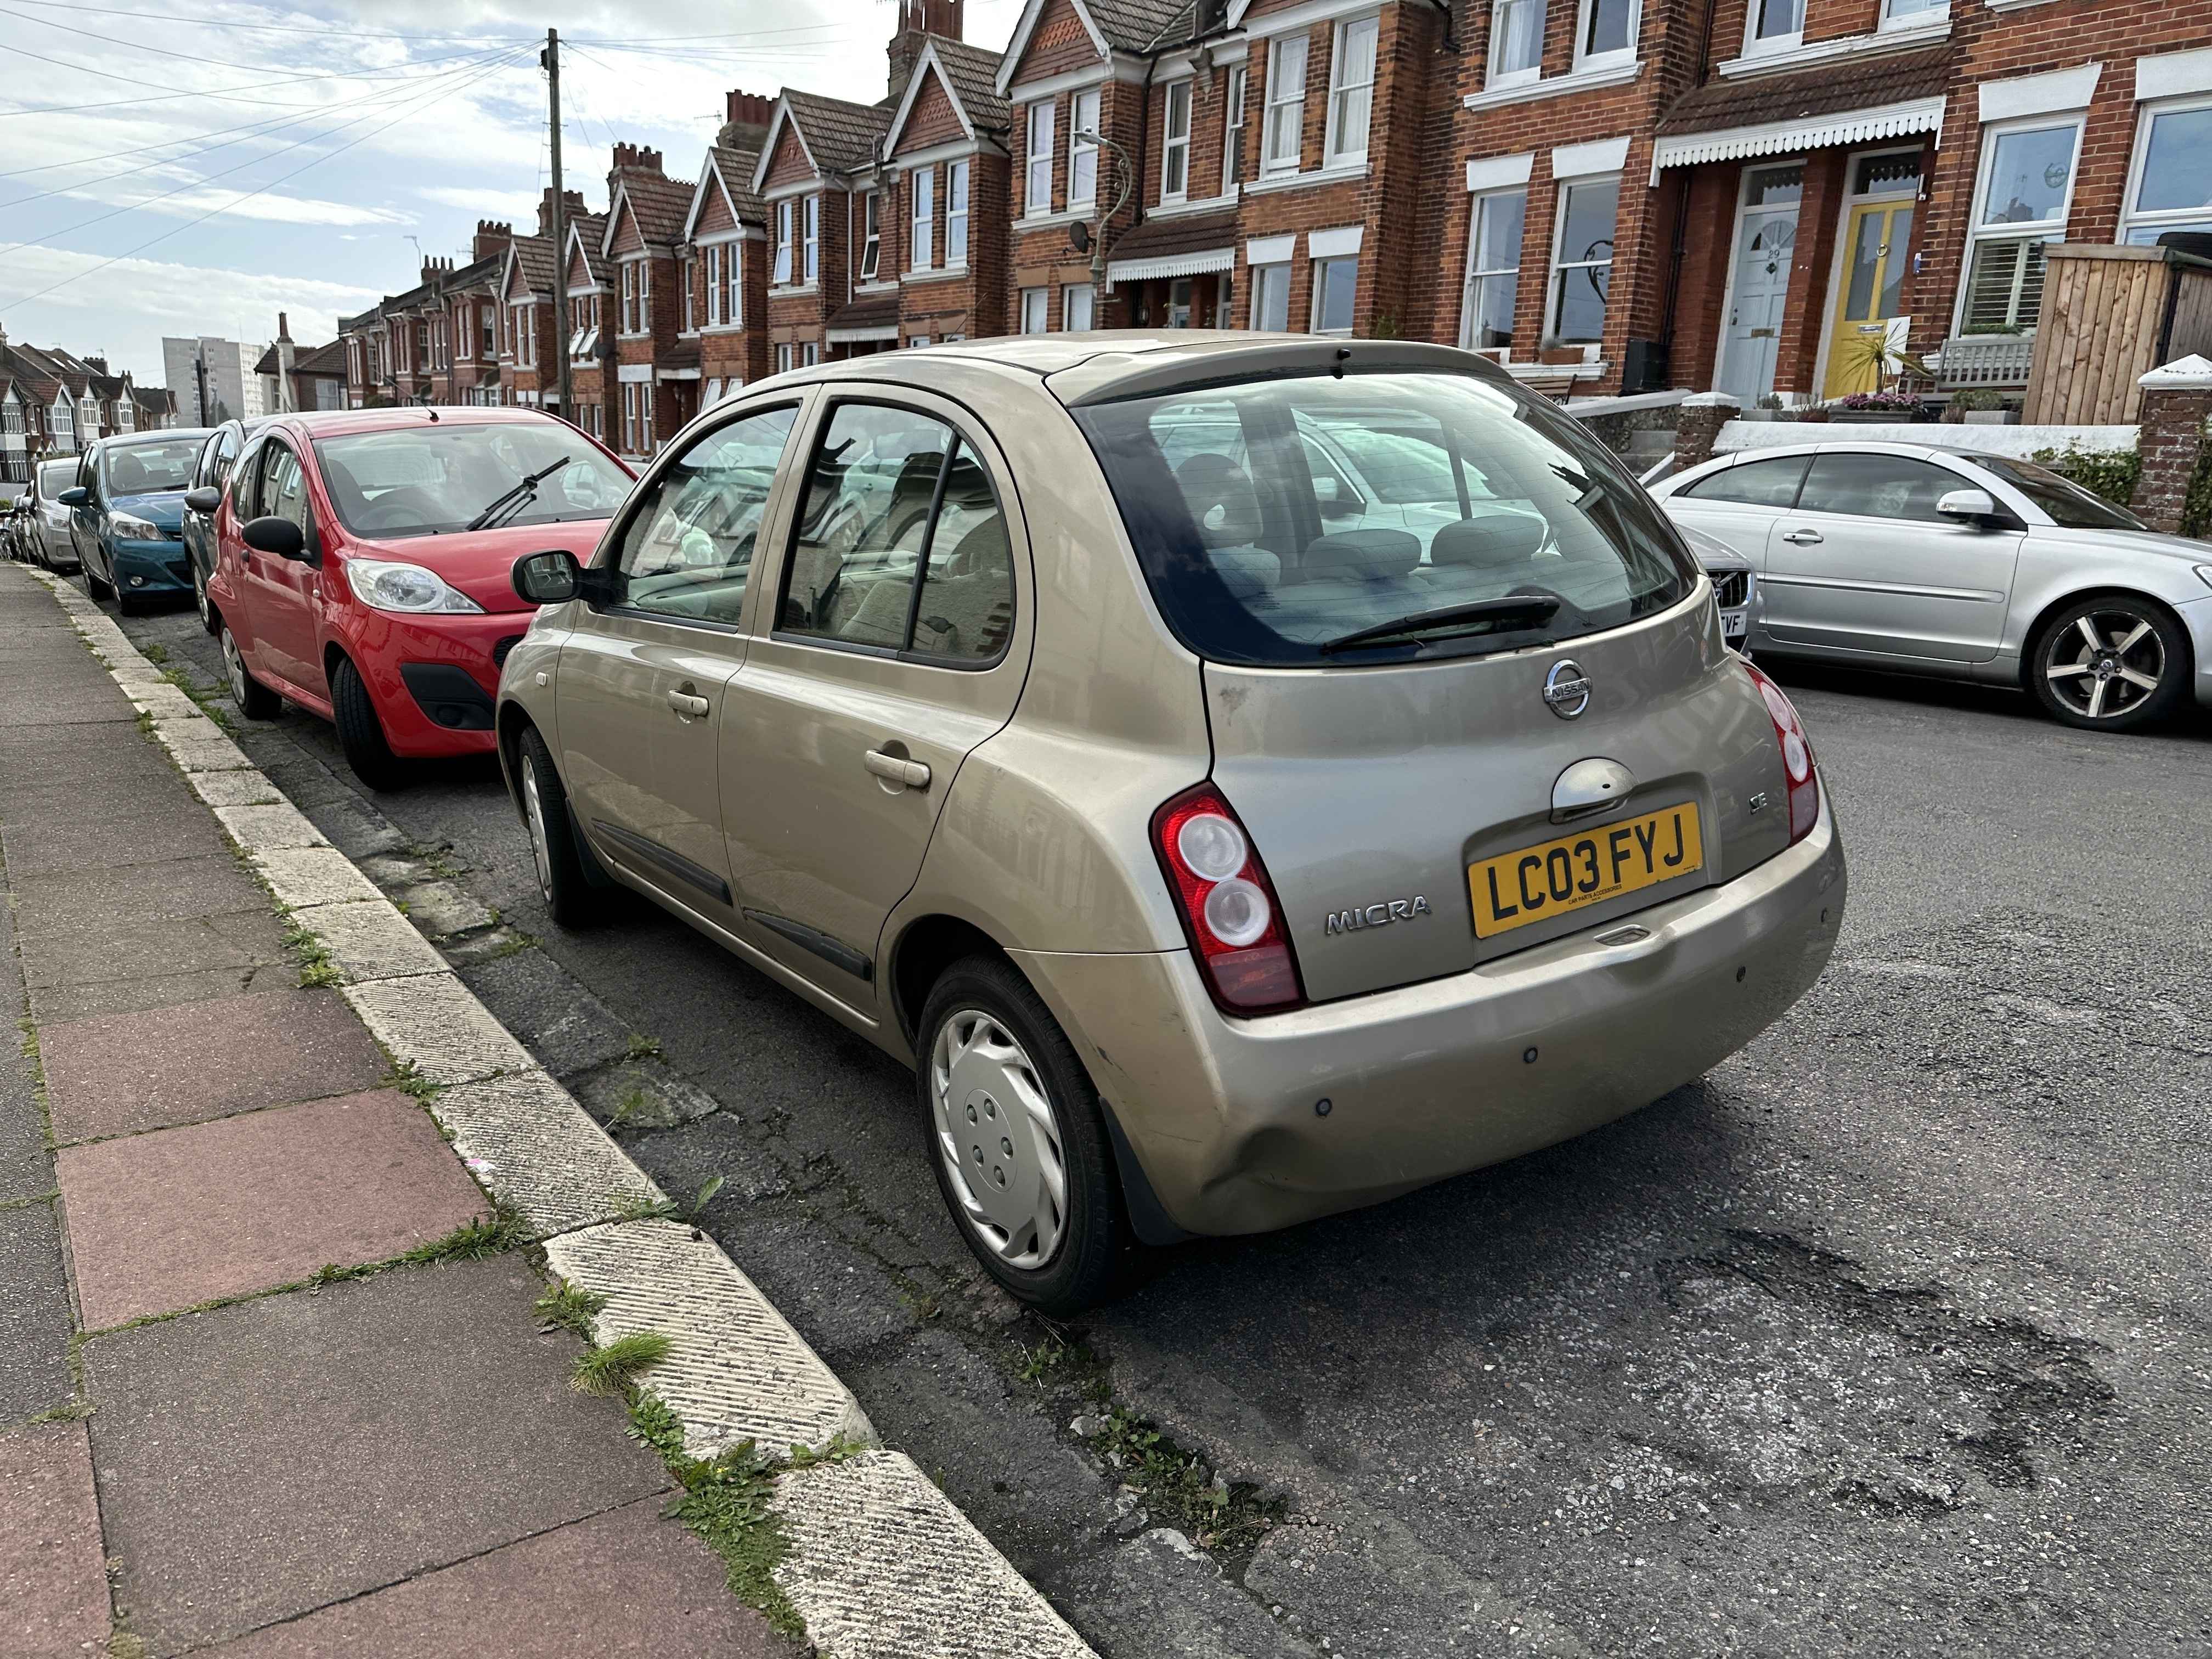 Photograph of LC03 FYJ - a Gold Nissan Micra parked in Hollingdean by a non-resident, and potentially abandoned. The third of seventeen photographs supplied by the residents of Hollingdean.